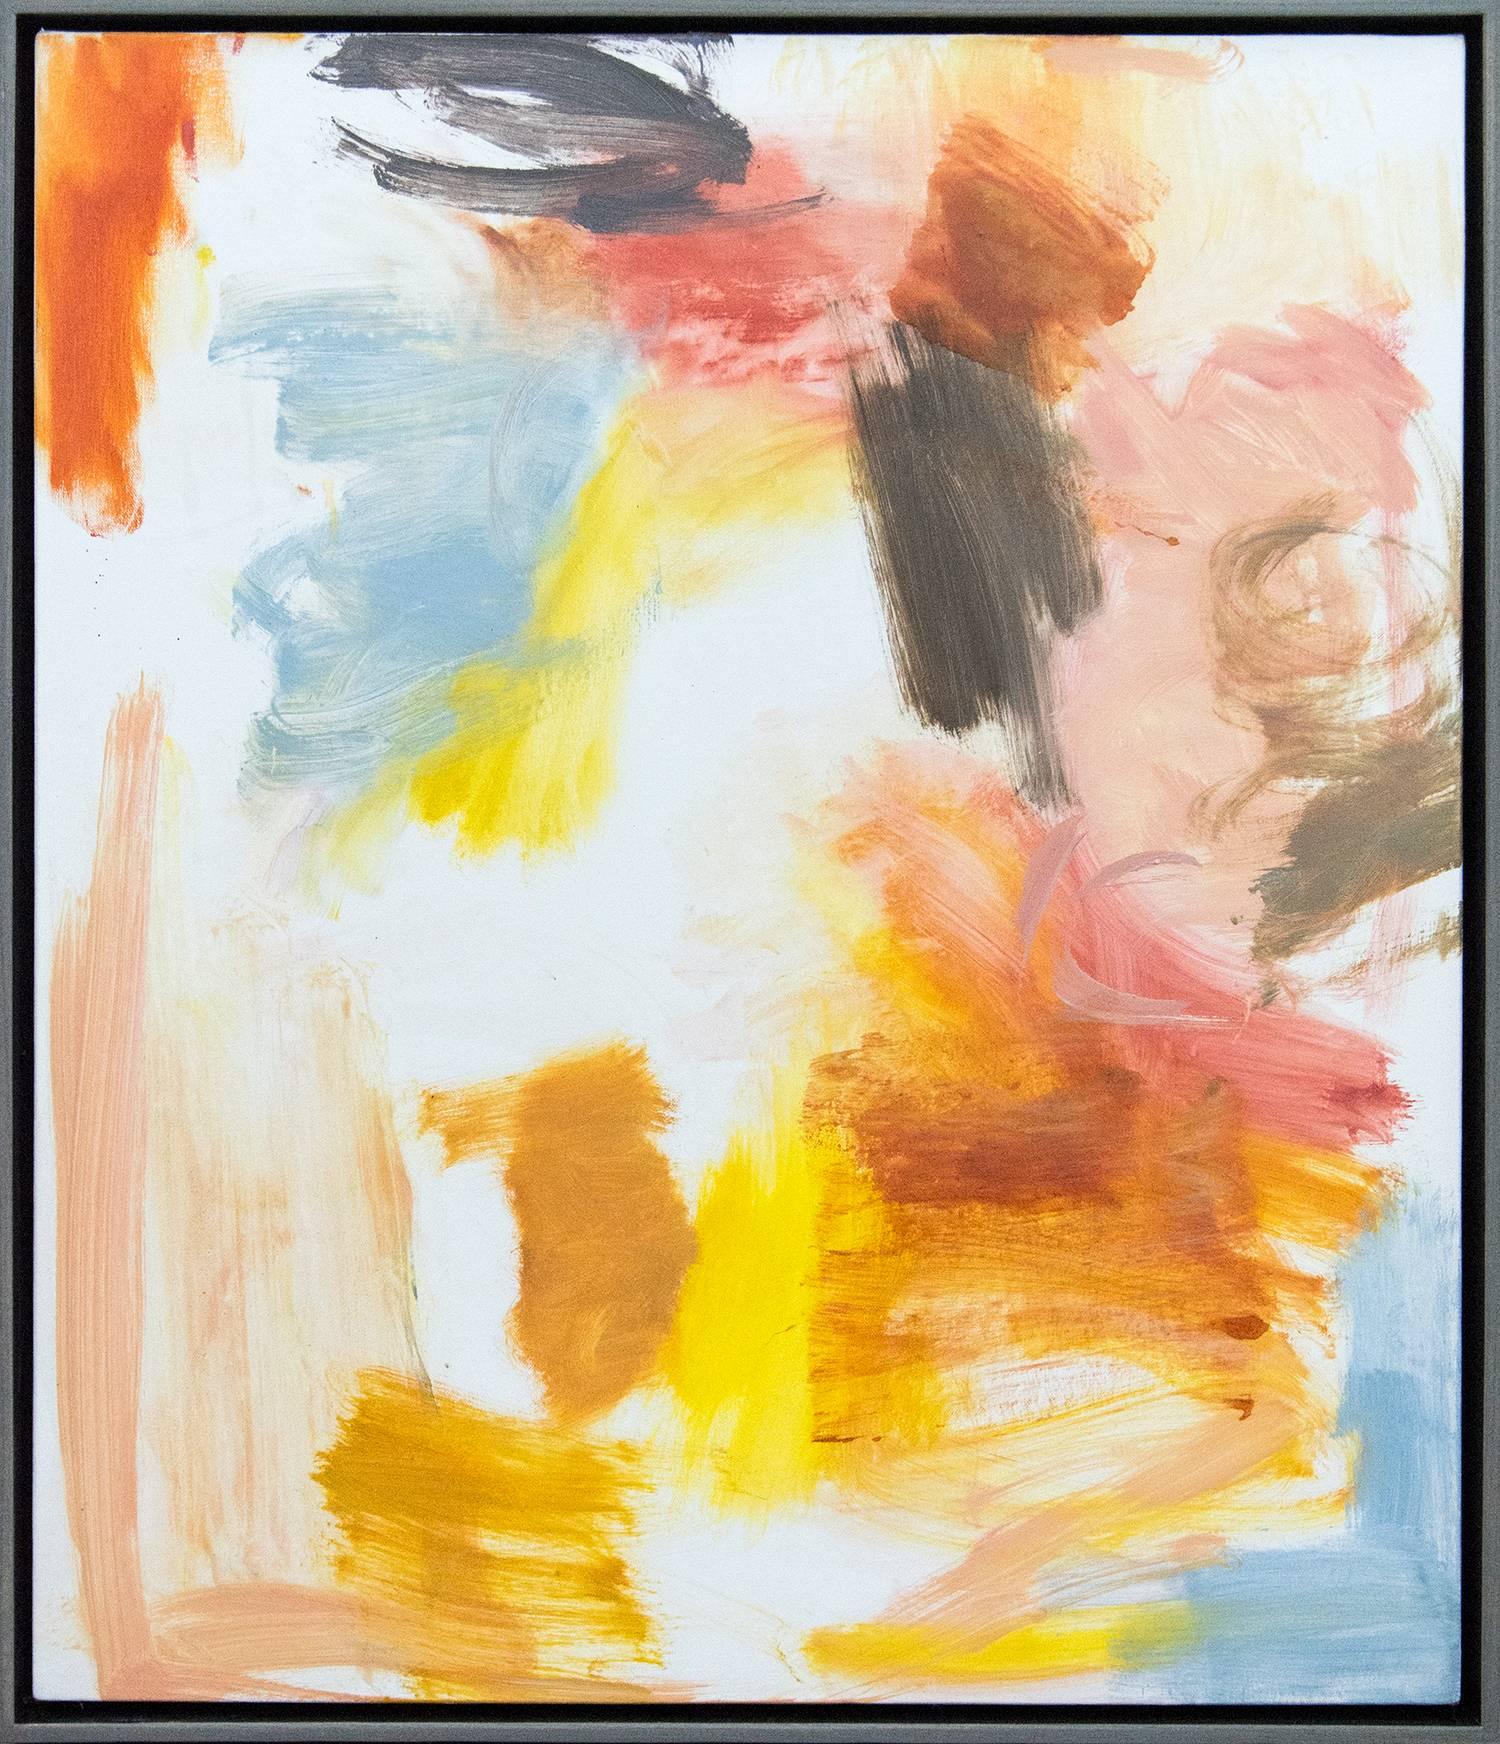 Ouvert No 69 - warm, intimate, colourful, gestural abstraction, oil on canvas - Painting by Scott Pattinson